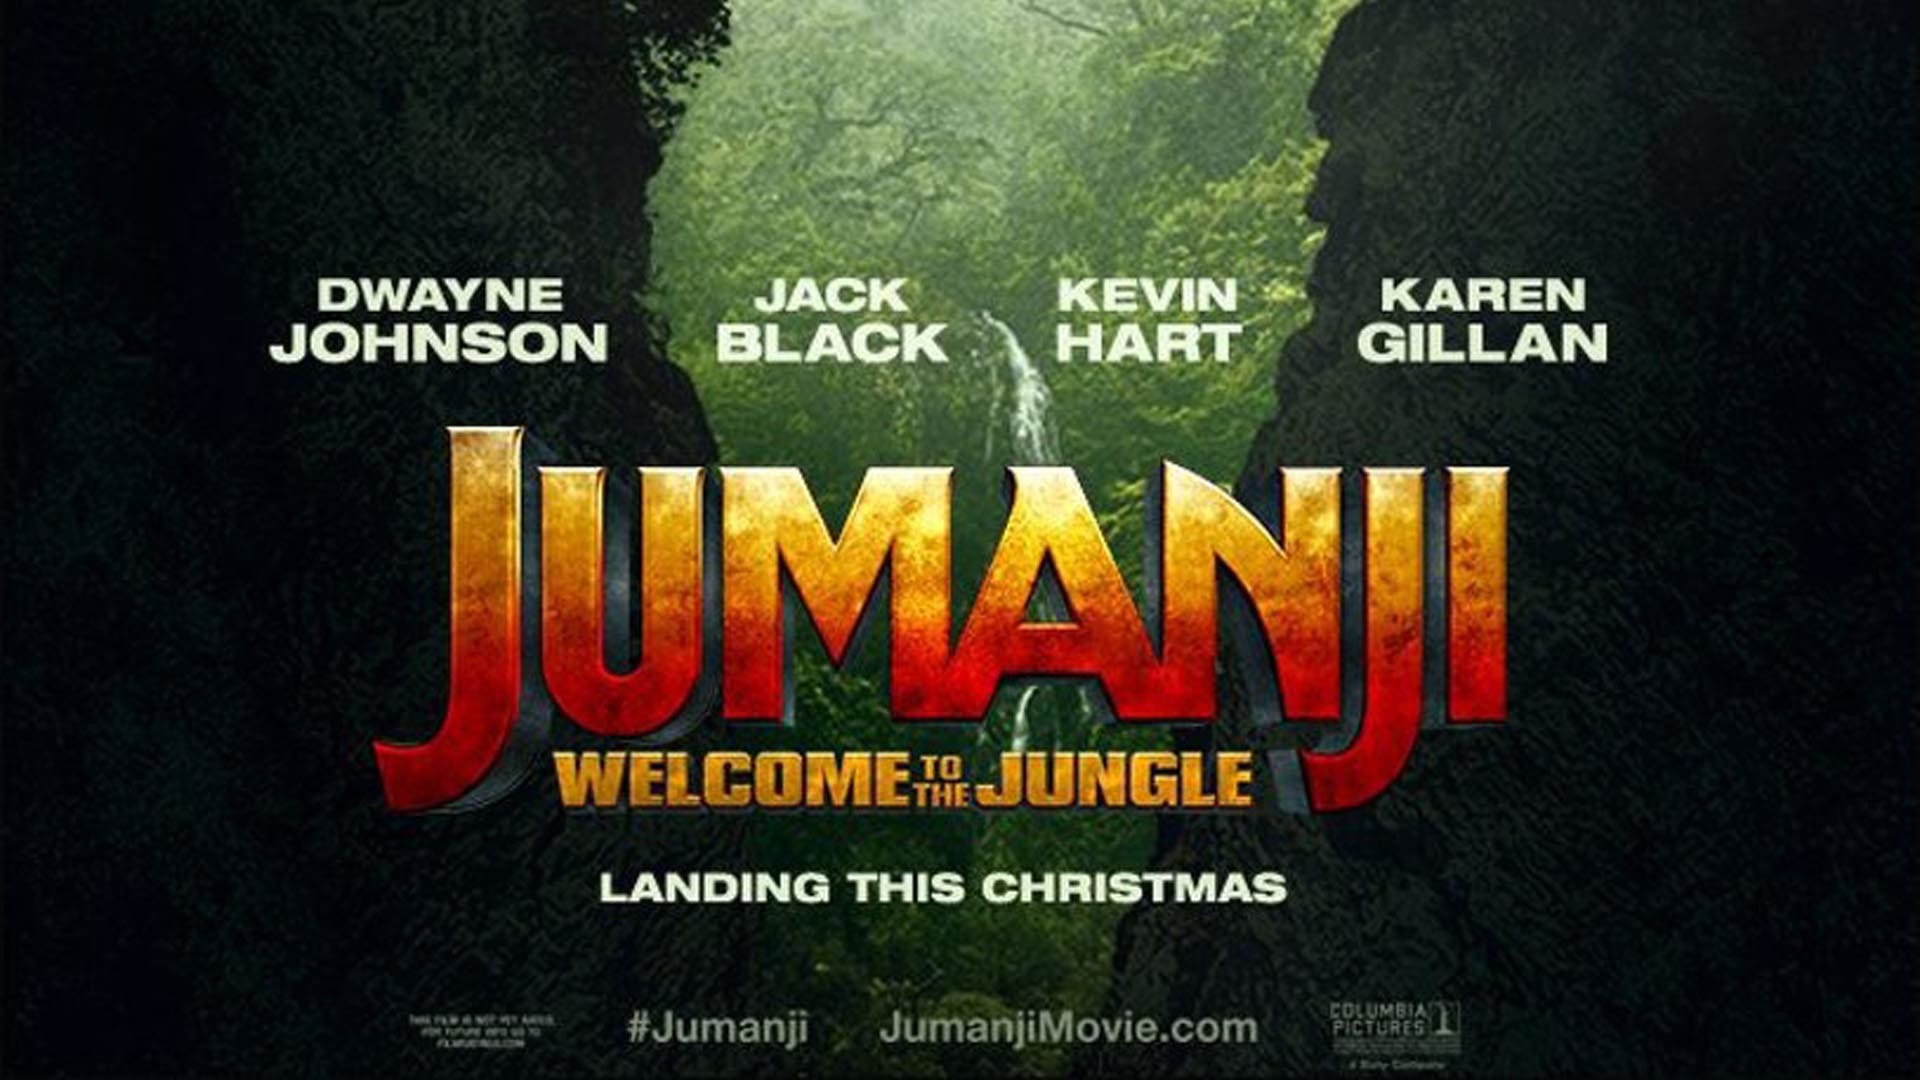 1920x1080 Jumanji: Welcome to the Jungle 2017 Movie Poster  wallpaper